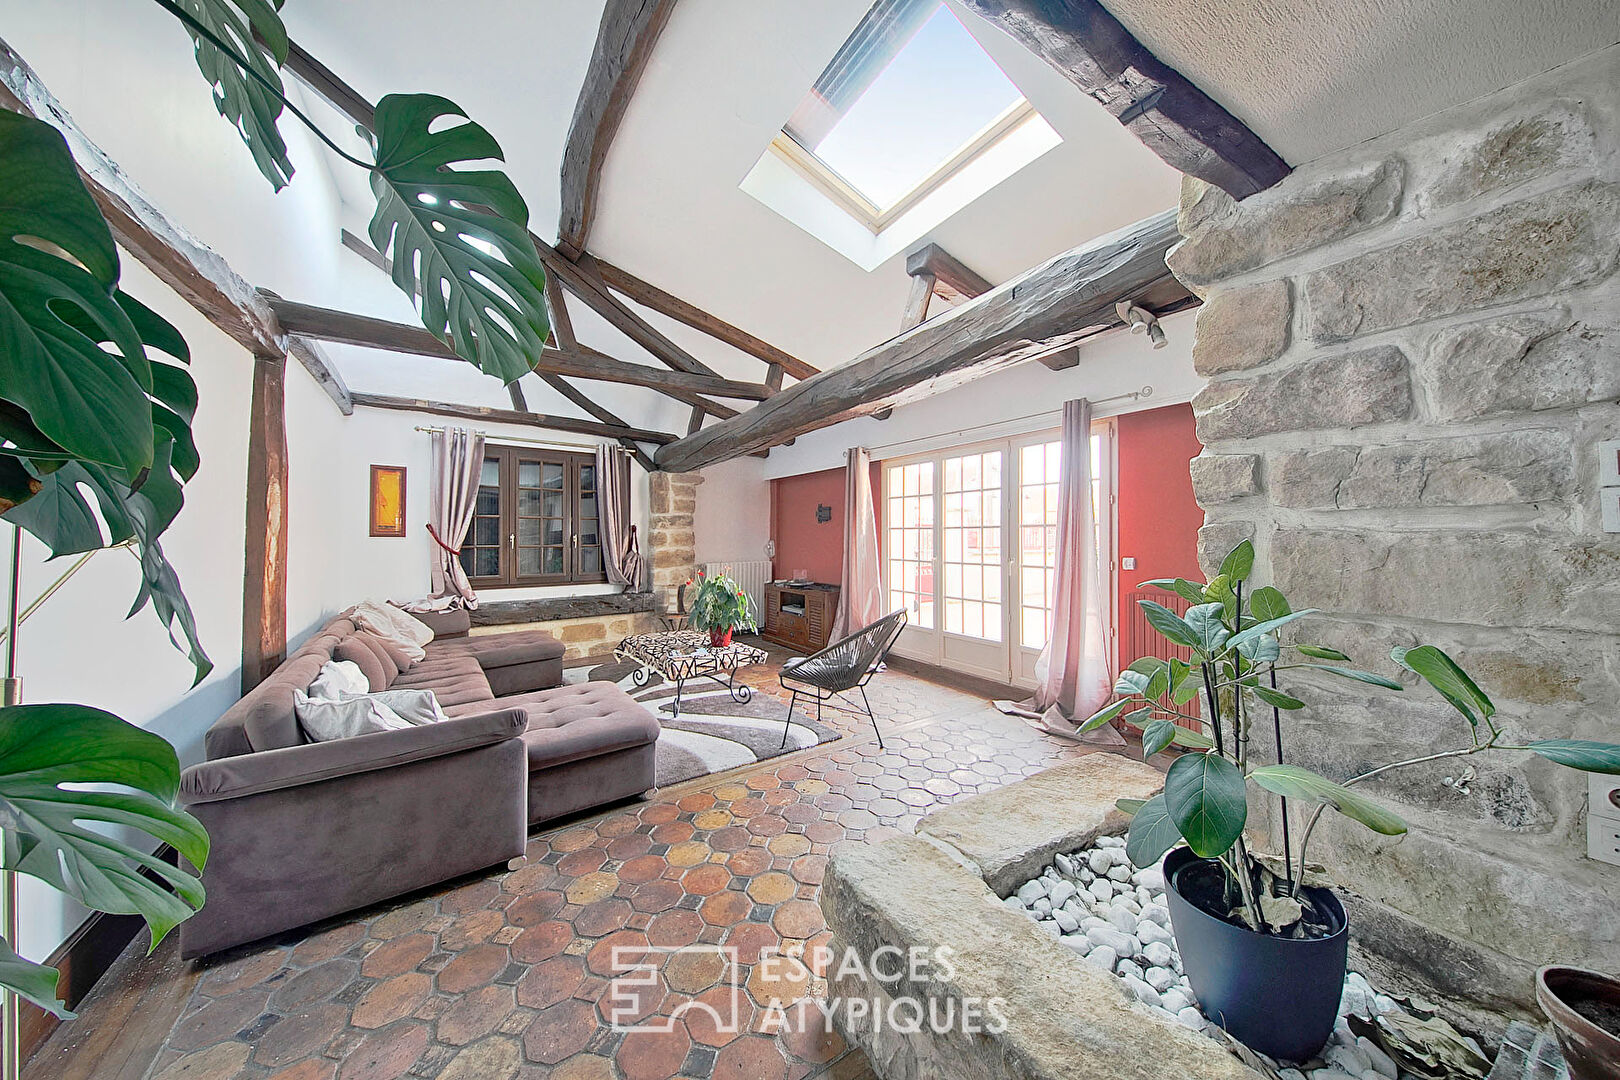 Renovated farmhouse with garden and indoor swimming pool